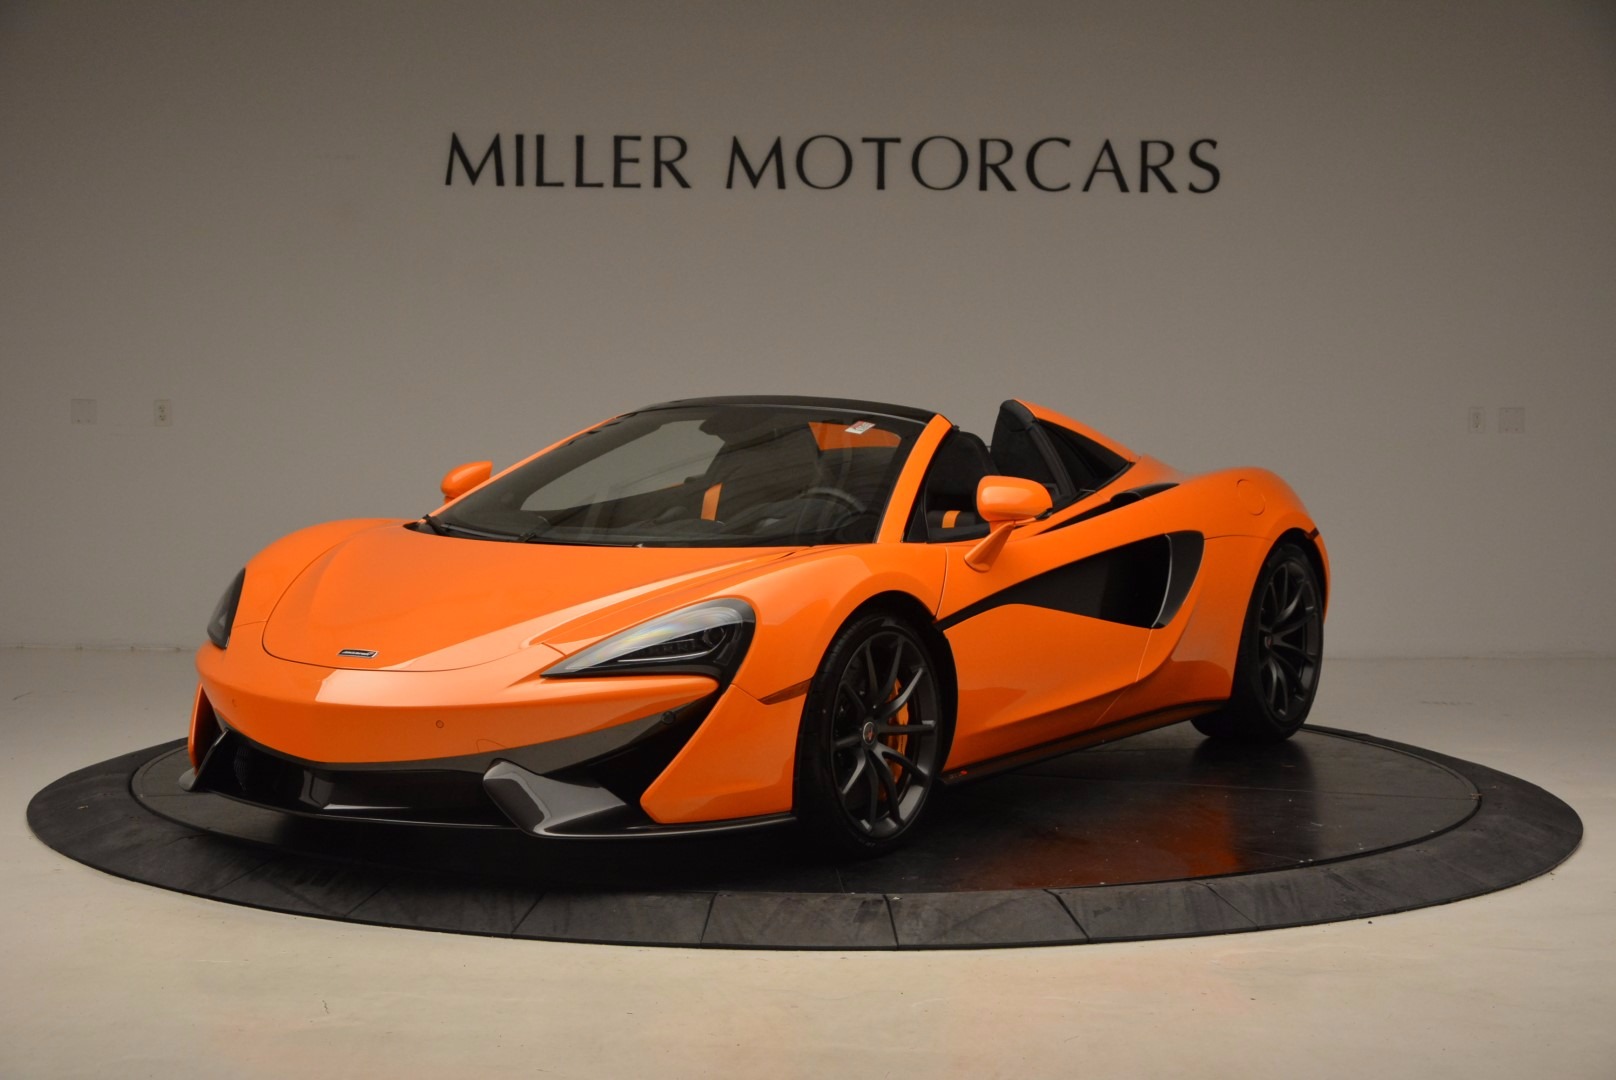 New 2018 McLaren 570S Spider for sale Sold at Bentley Greenwich in Greenwich CT 06830 1